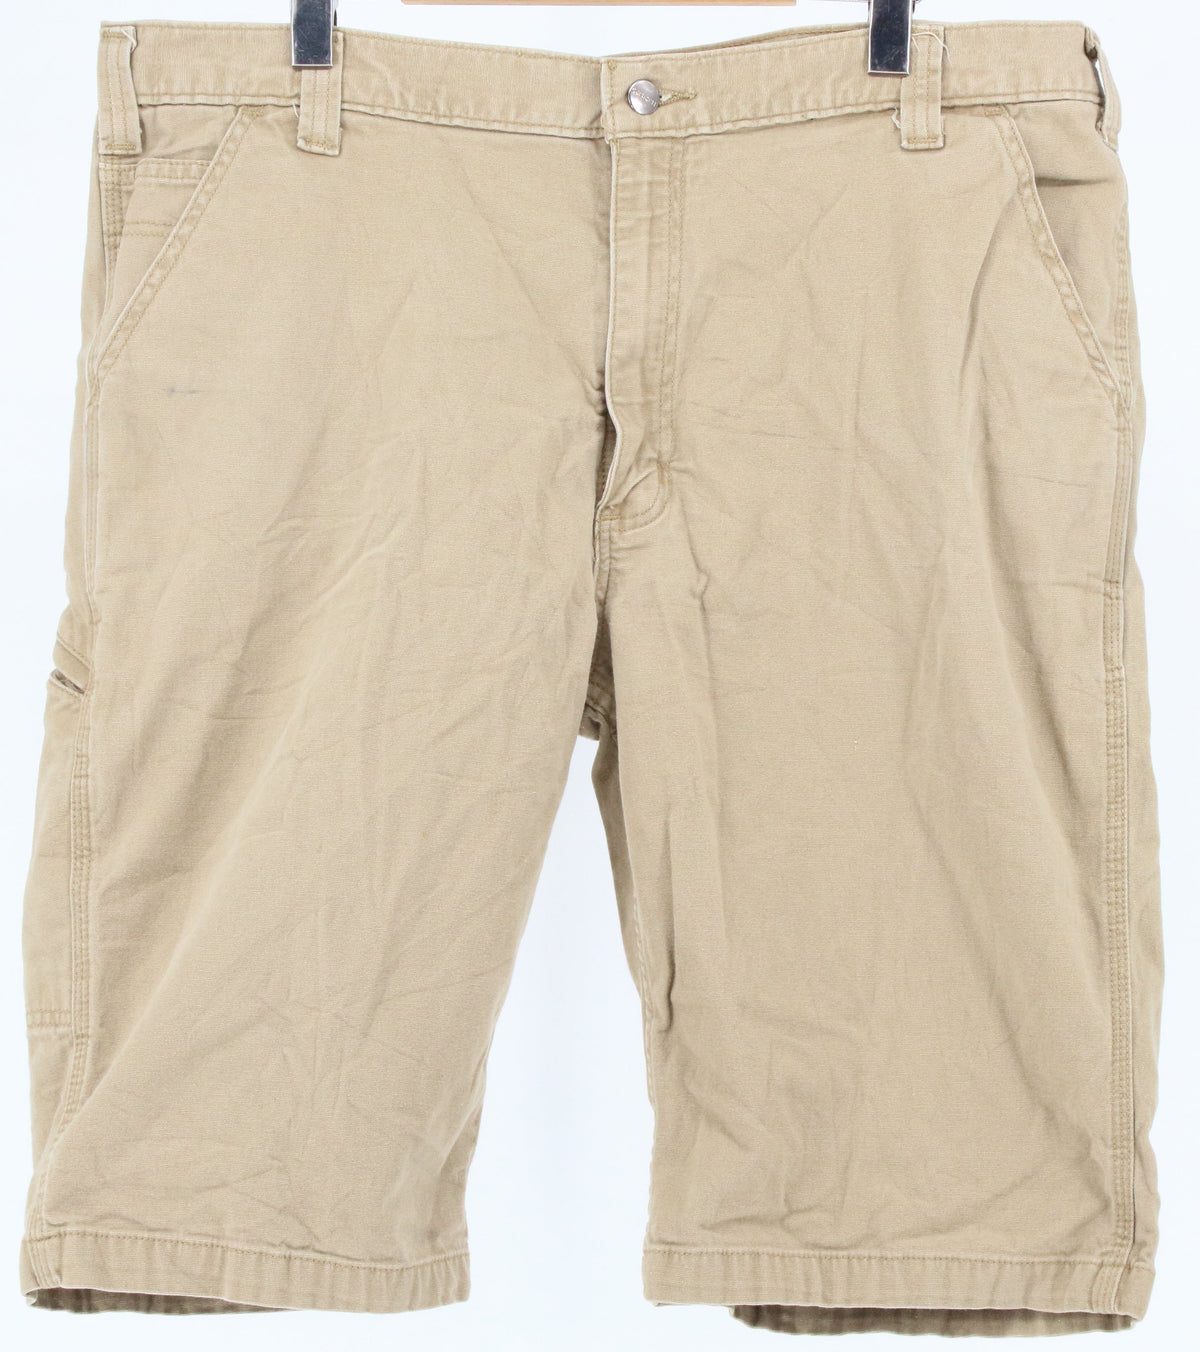 Carhartt Beige Relaxed Fit Shorts